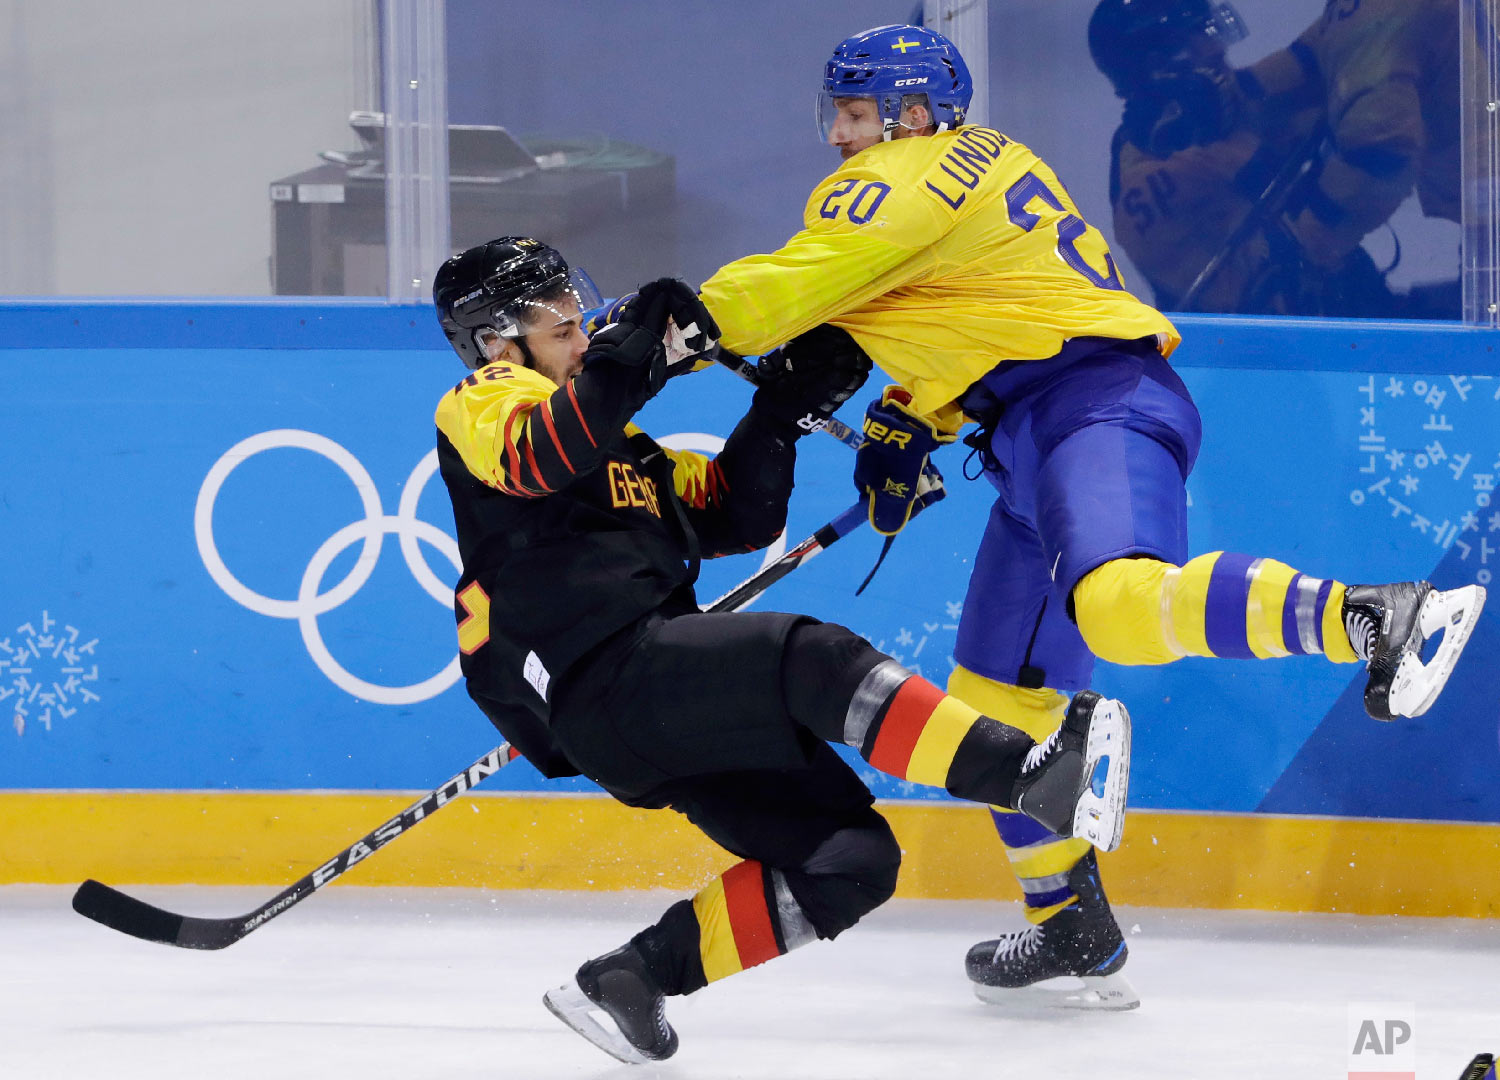  Joel Lundqvist (20), of Sweden, and Yasin Ehliz (42), of Germany, collide during the third period of a preliminary round men's hockey game at the 2018 Winter Olympics, Friday, Feb. 16, 2018, in Gangneung, South Korea. Sweden won 1-0. (AP Photo/Matt 